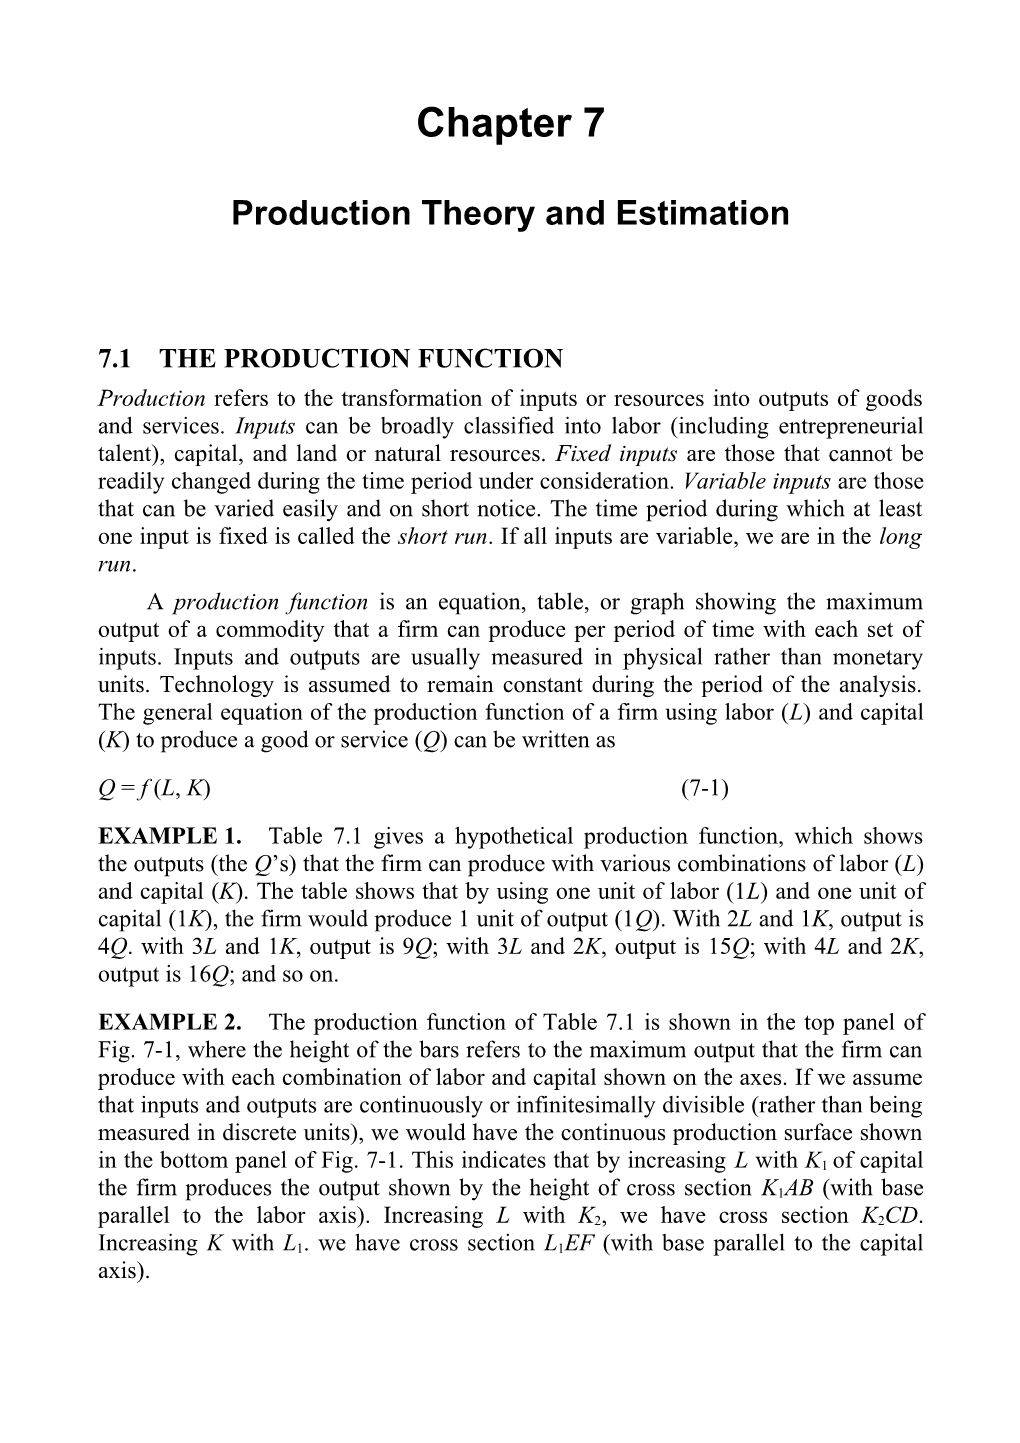 Production Theory and Estimation